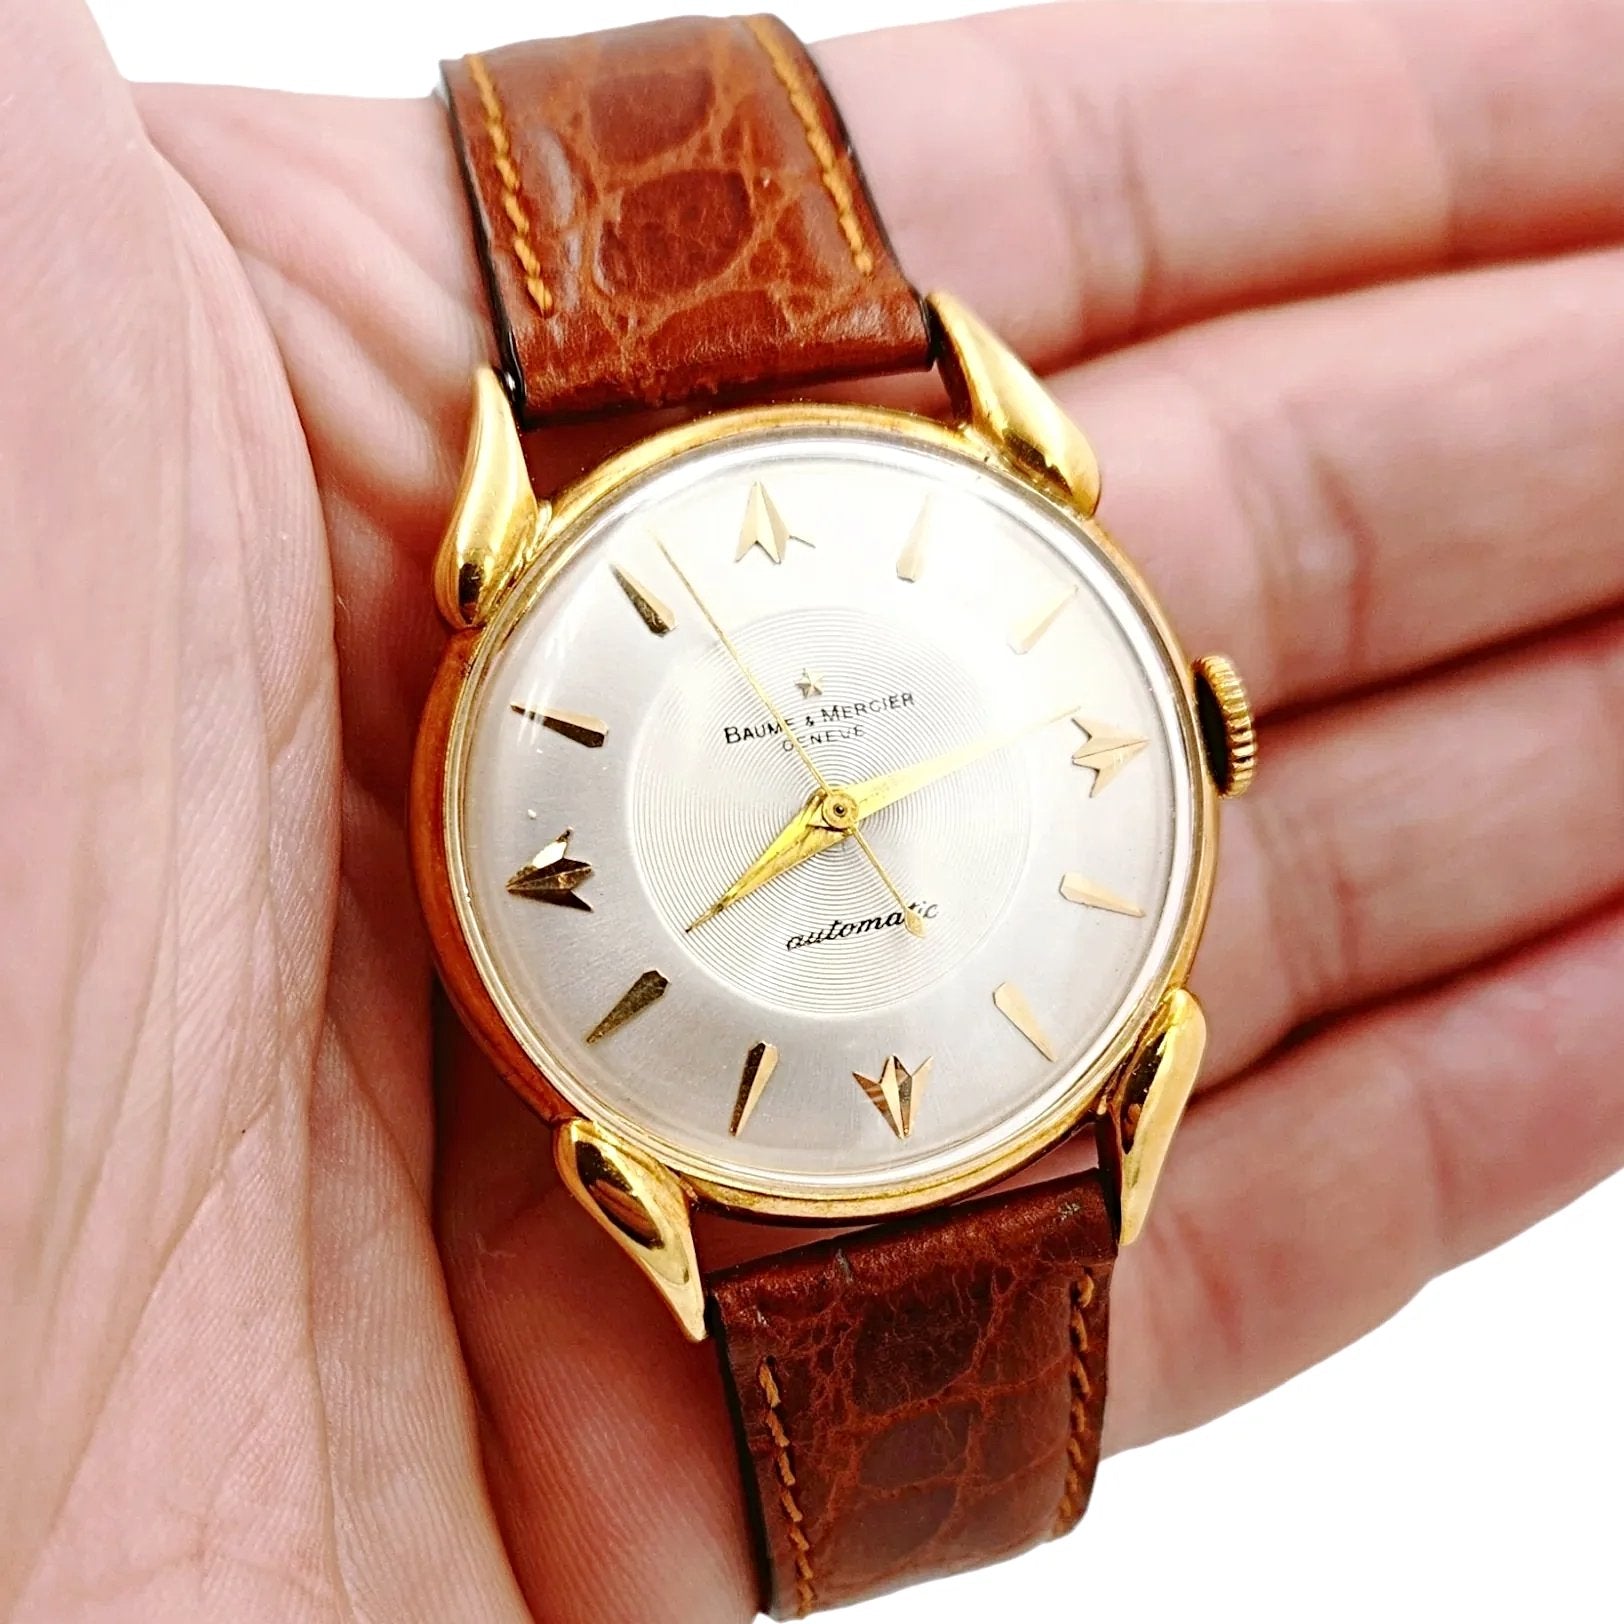 Men's Baume & Mercier 34mm Automatic Vintage 14K Yellow Gold Watch with Brown Leather Band and Silver Dial. (Pre-Owned)